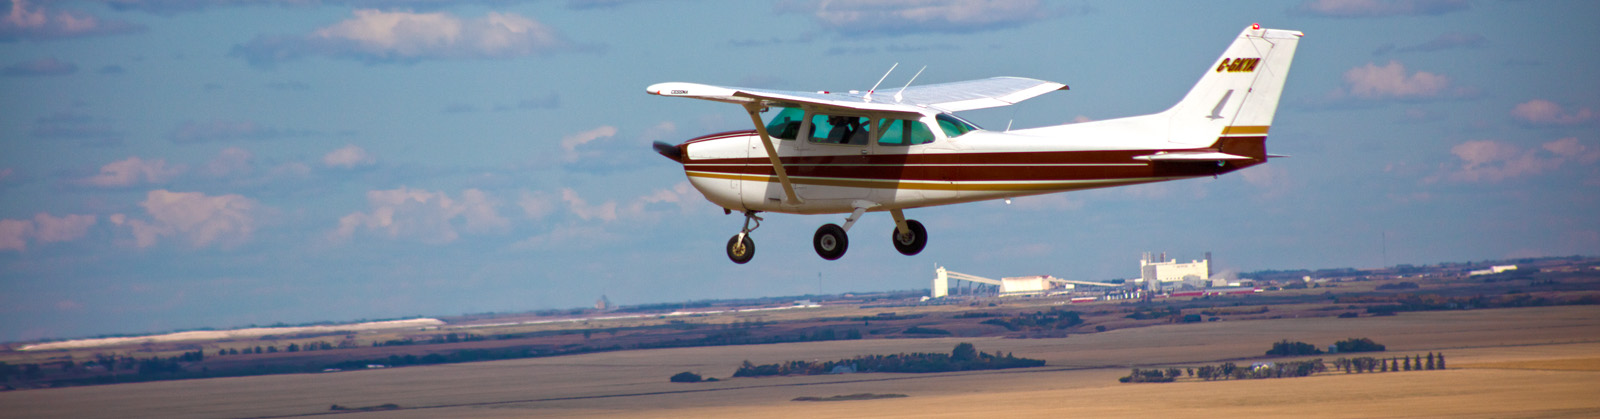 FAQ - Frequently Asked Questions - Provincial Airways - Flight School